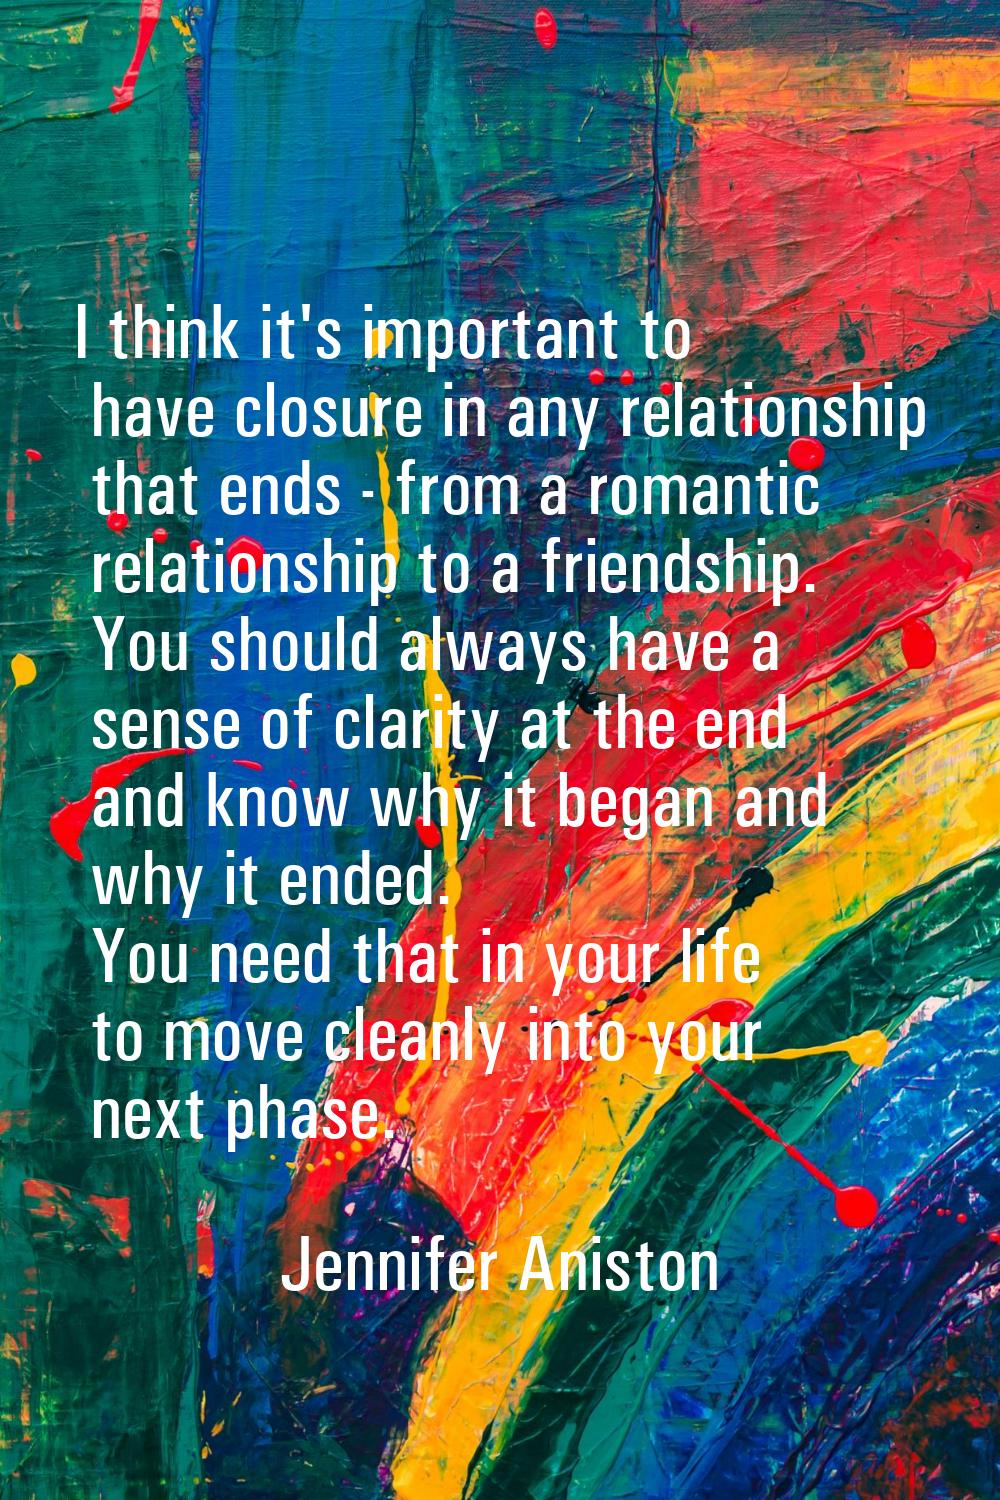 I think it's important to have closure in any relationship that ends - from a romantic relationship